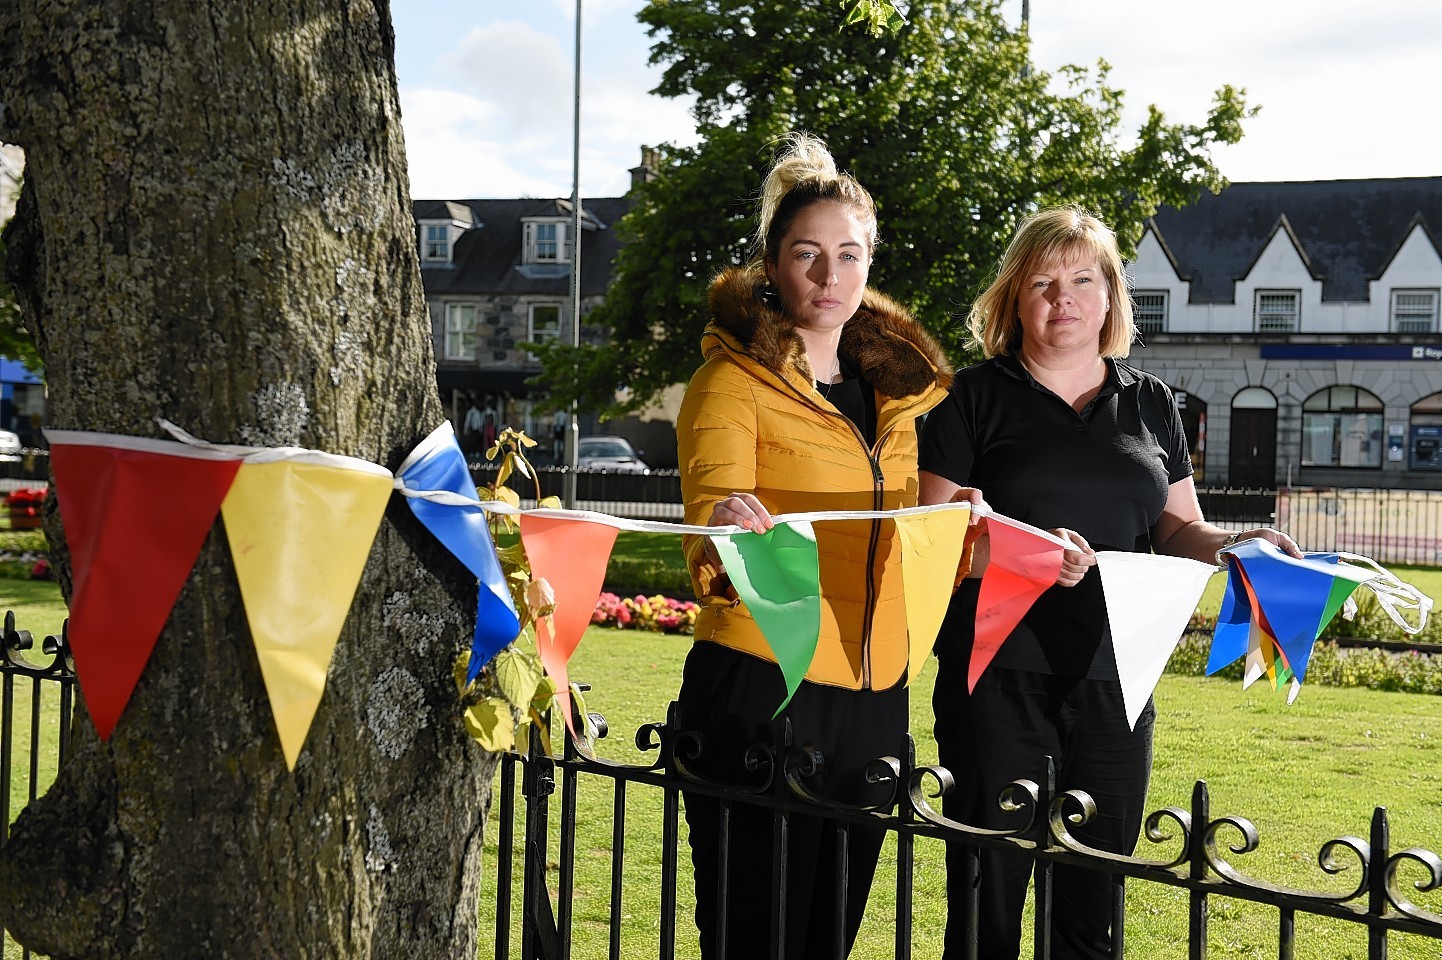 Aberdeenshire council officers have forced traders group Inverurie4U to take down their bunting down as they didnt have consent.
Picture of (L-R) Cheryl Rogerson and Judy Whyte.